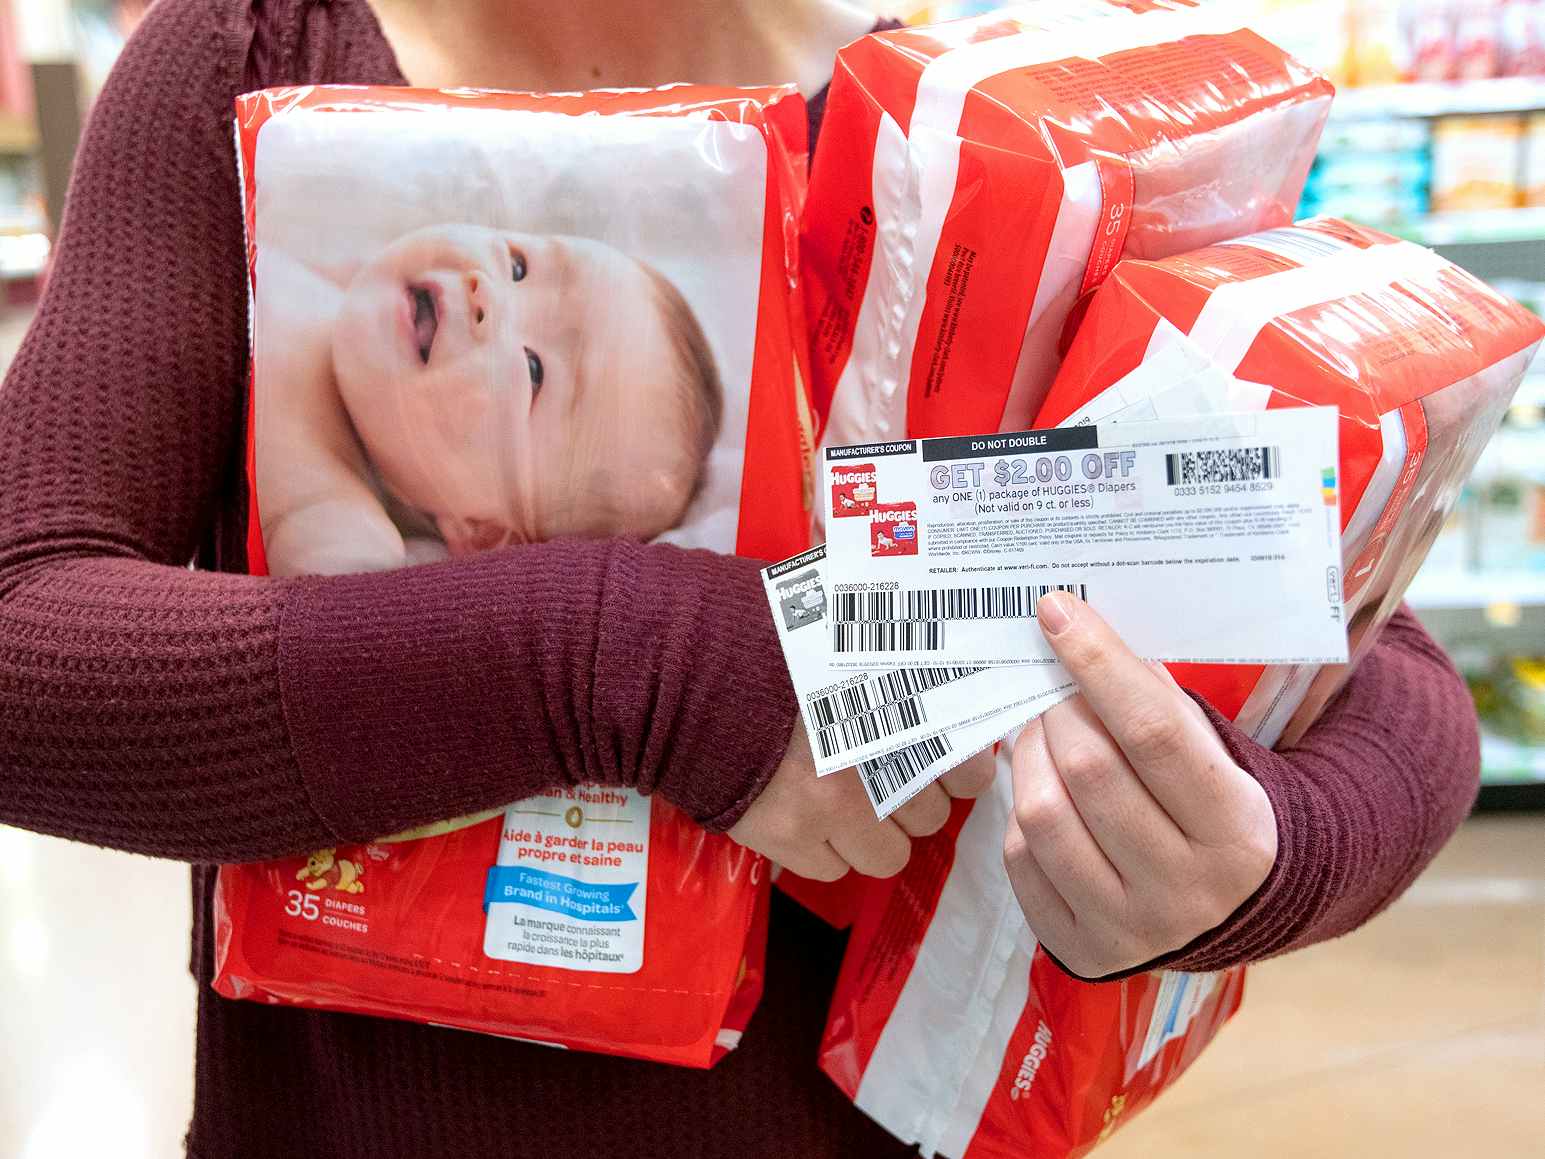 A person holding packages of baby diapers and coupons.